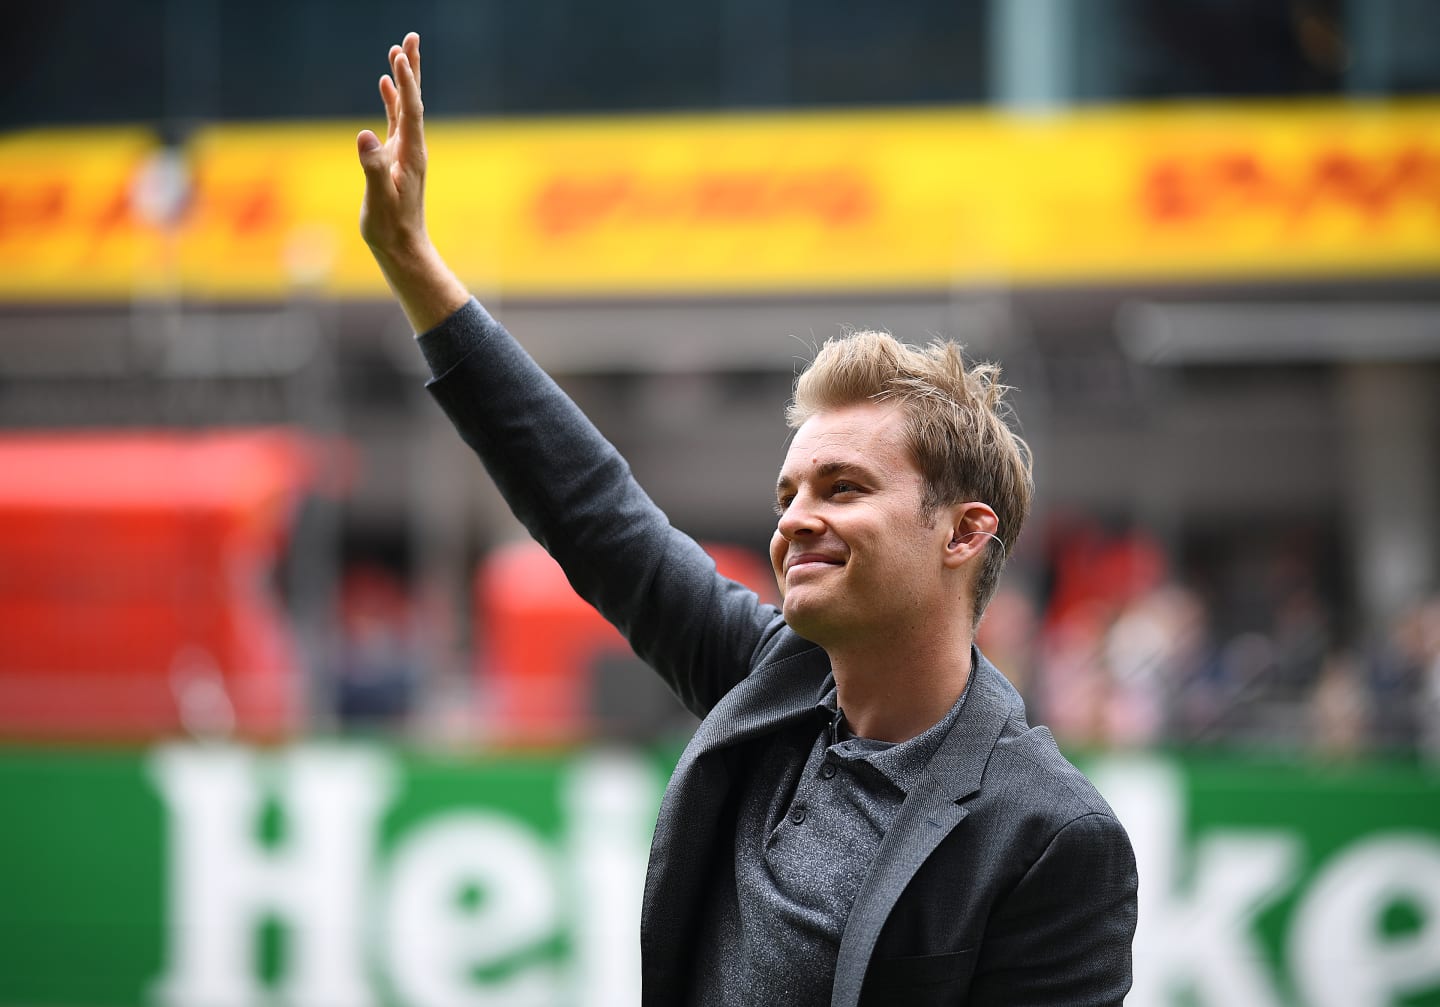 SHANGHAI, CHINA - APRIL 14: 2016 F1 World Drivers Champion Nico Rosberg waves to the crowd before